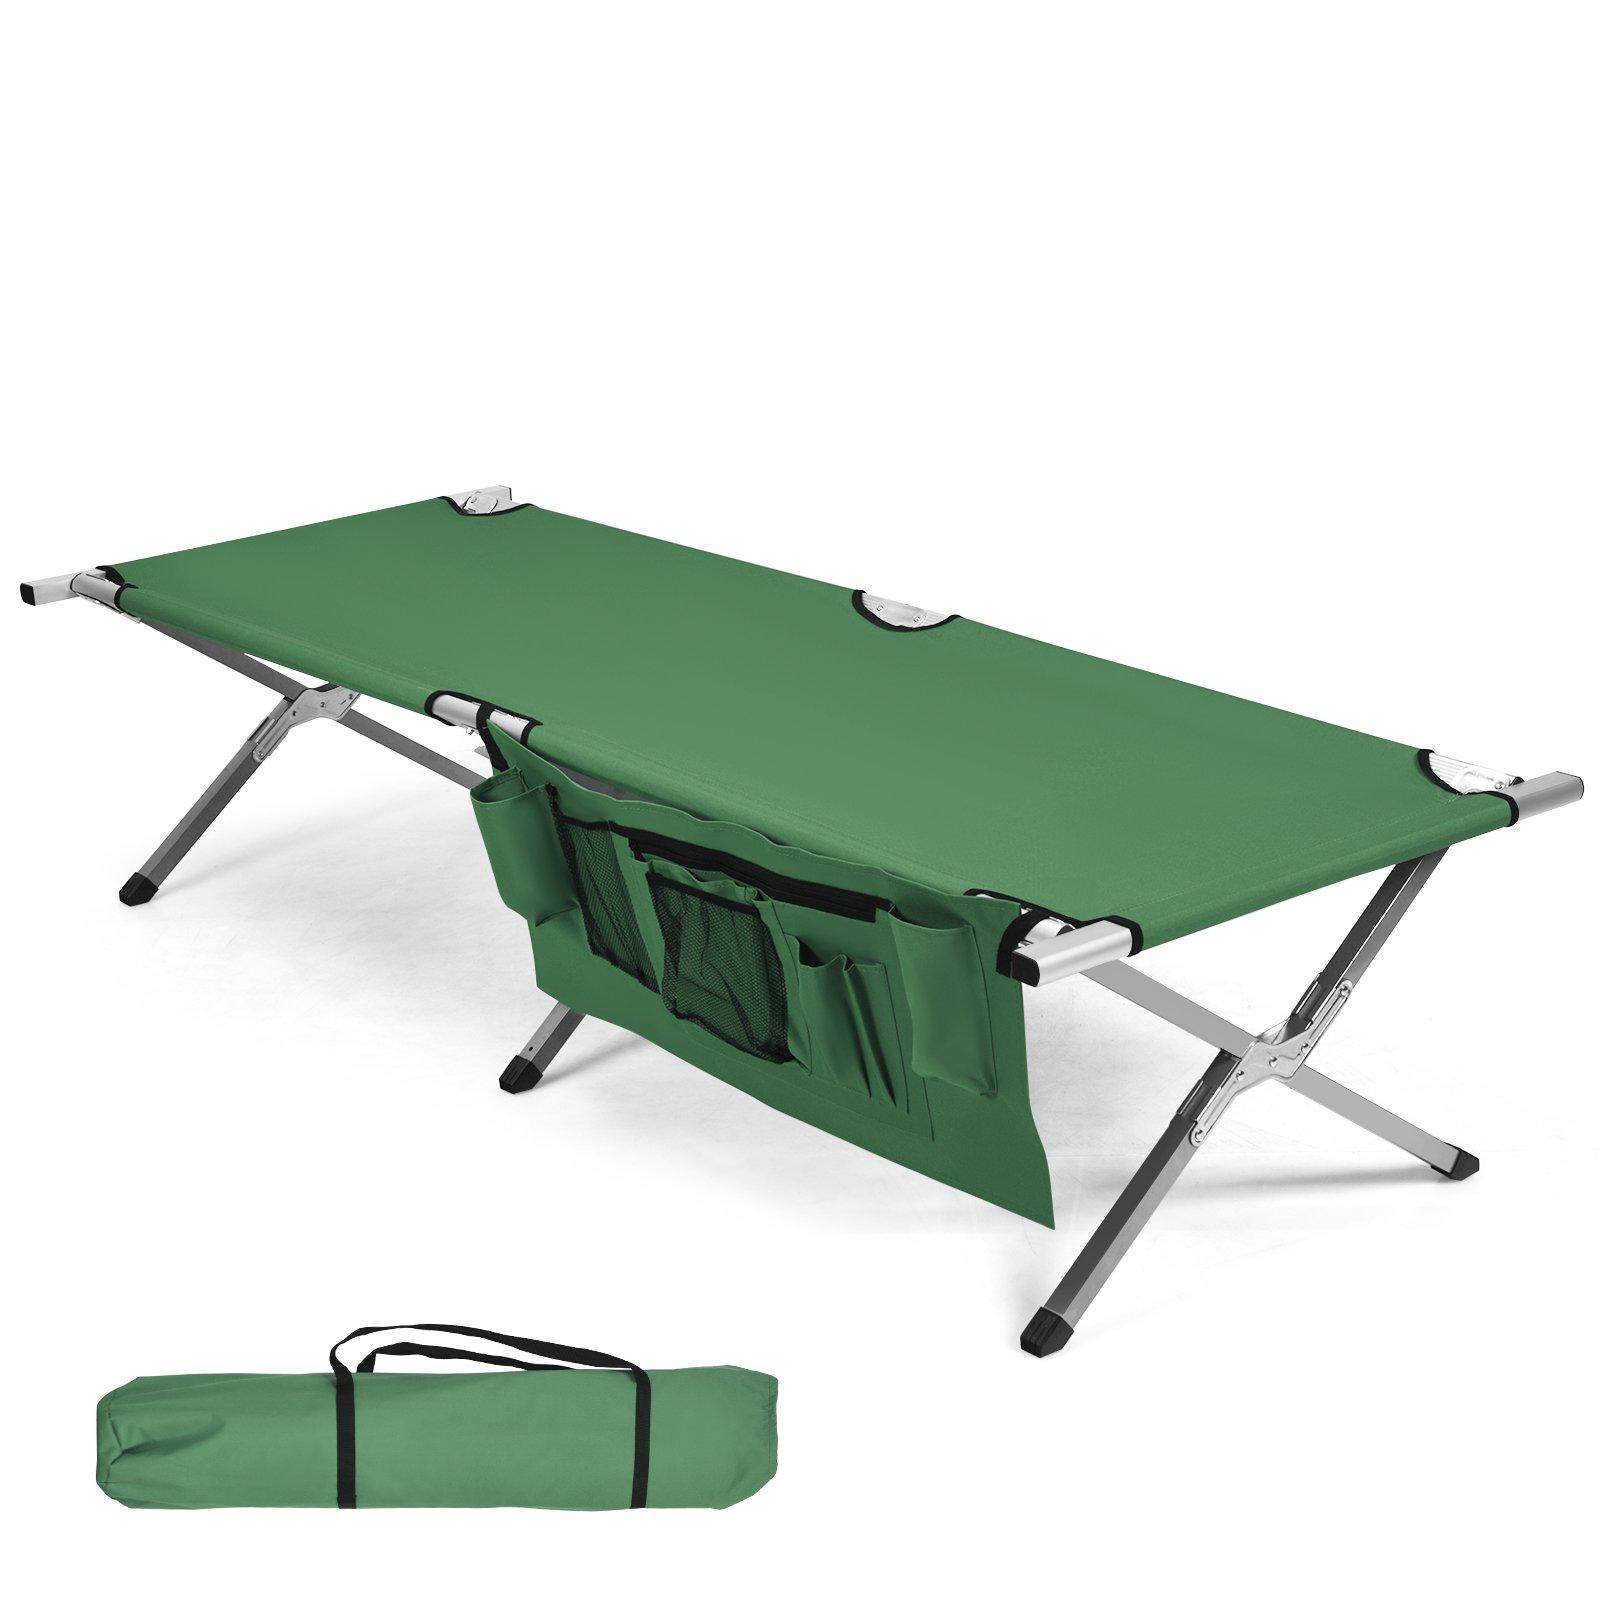 Folding Camping Cot Collapsible Portable Sleeping Army Camp Bed W/ Carry Bag